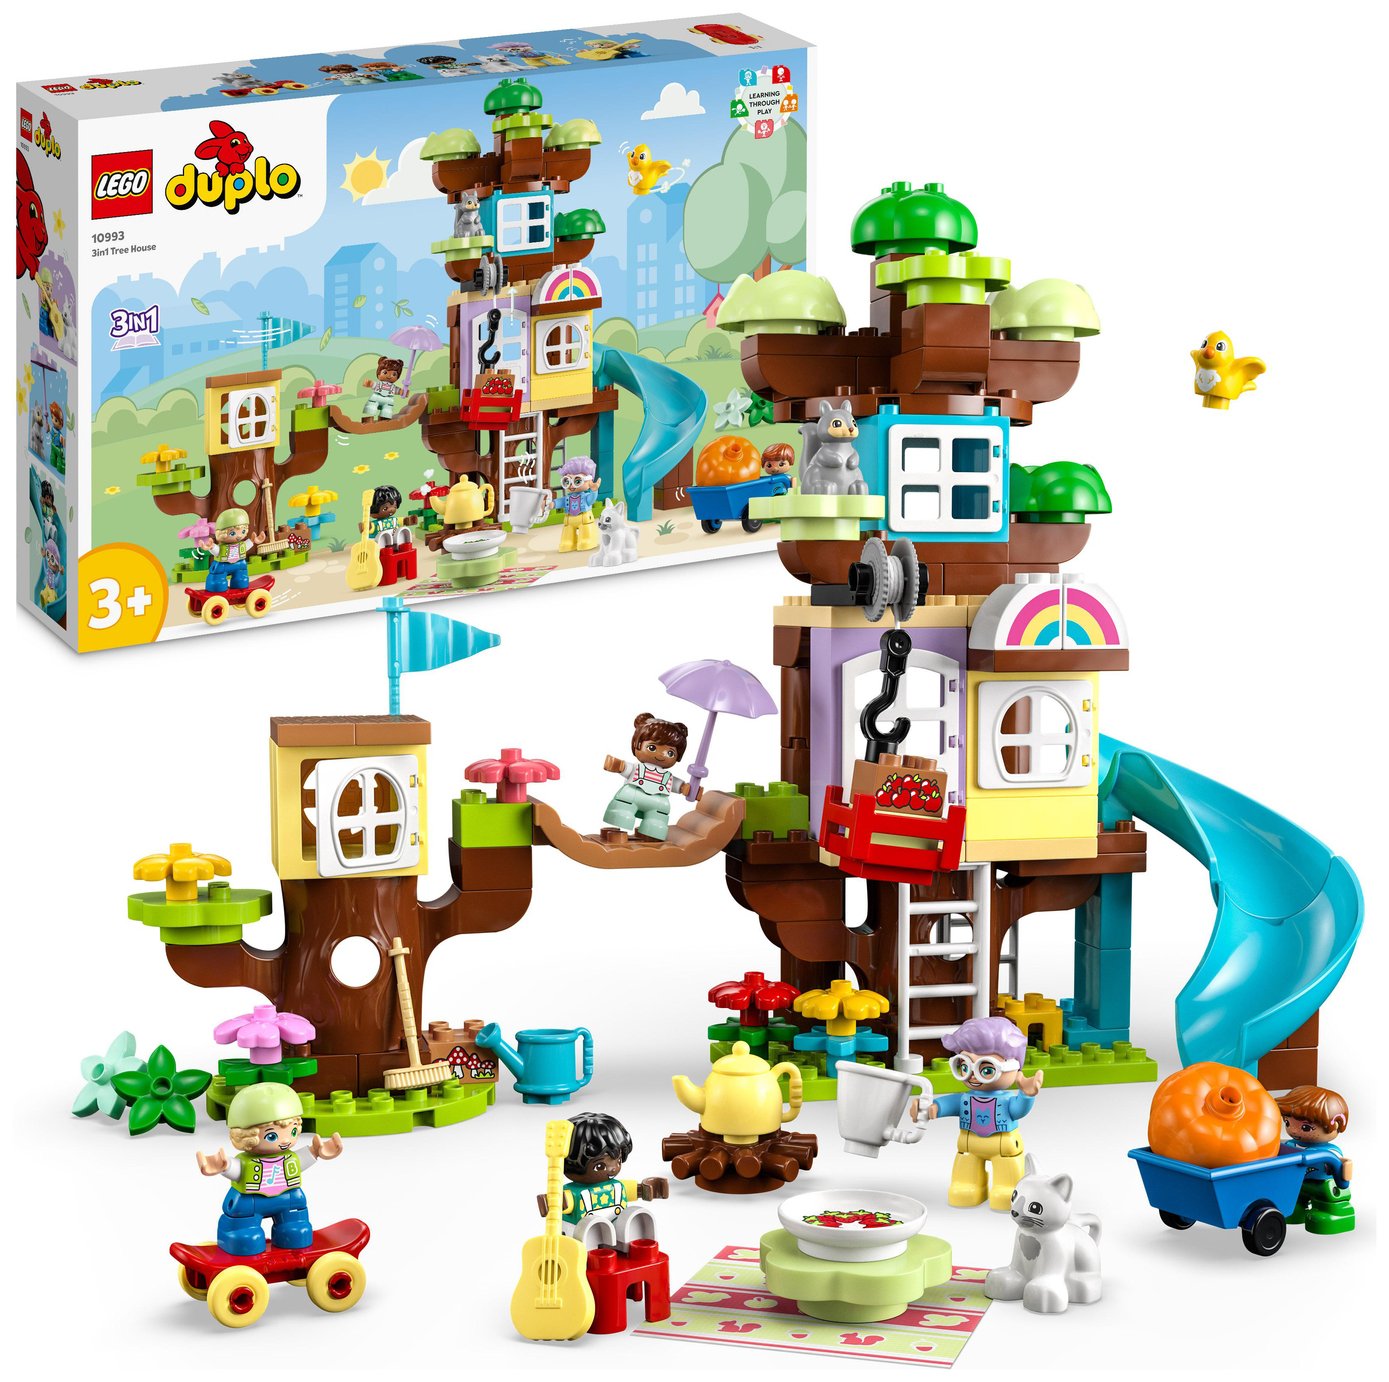 LEGO DUPLO 3in1 Tree House Set with Animal Figures 10993